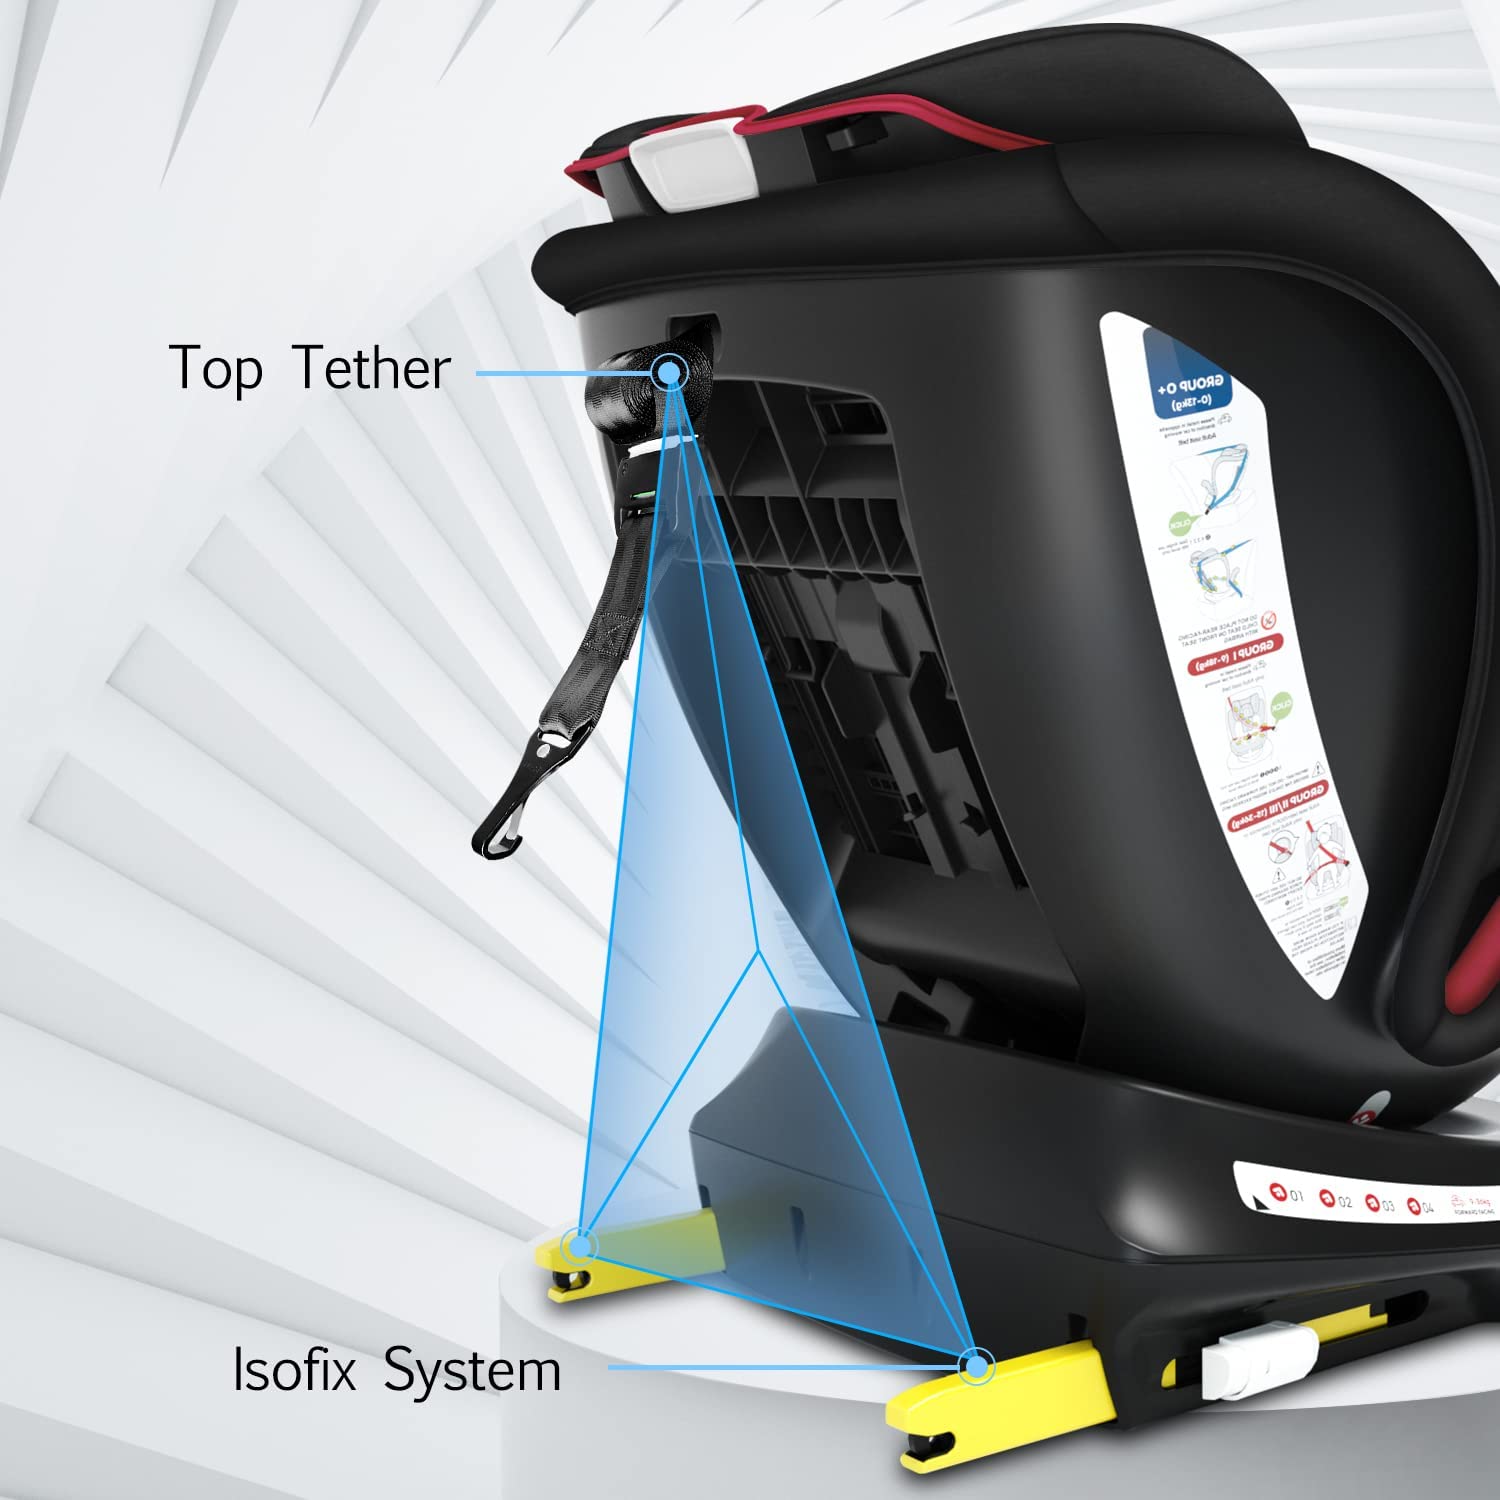 360° Baby Car Seat - with ISOFIX, Group 0+1/2/3 (0-36 kg), Approx. 0-12 Years